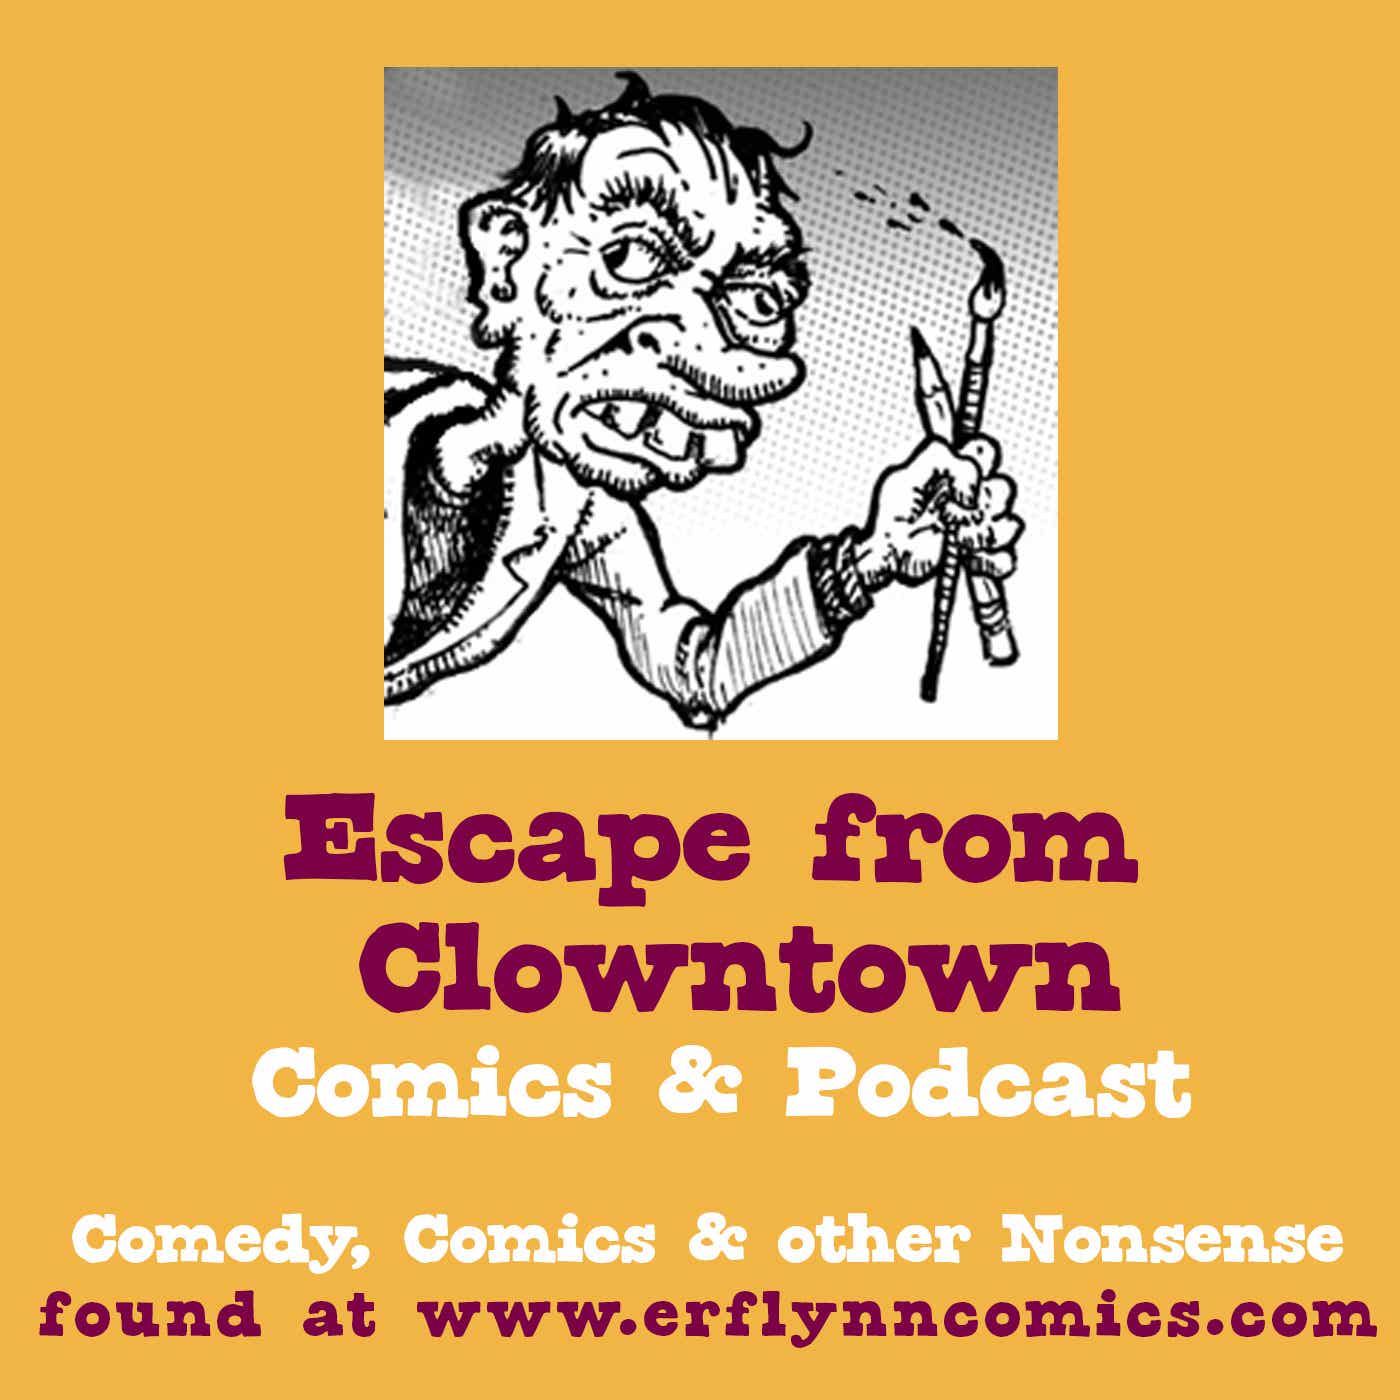 Escape From Clown town Podcast